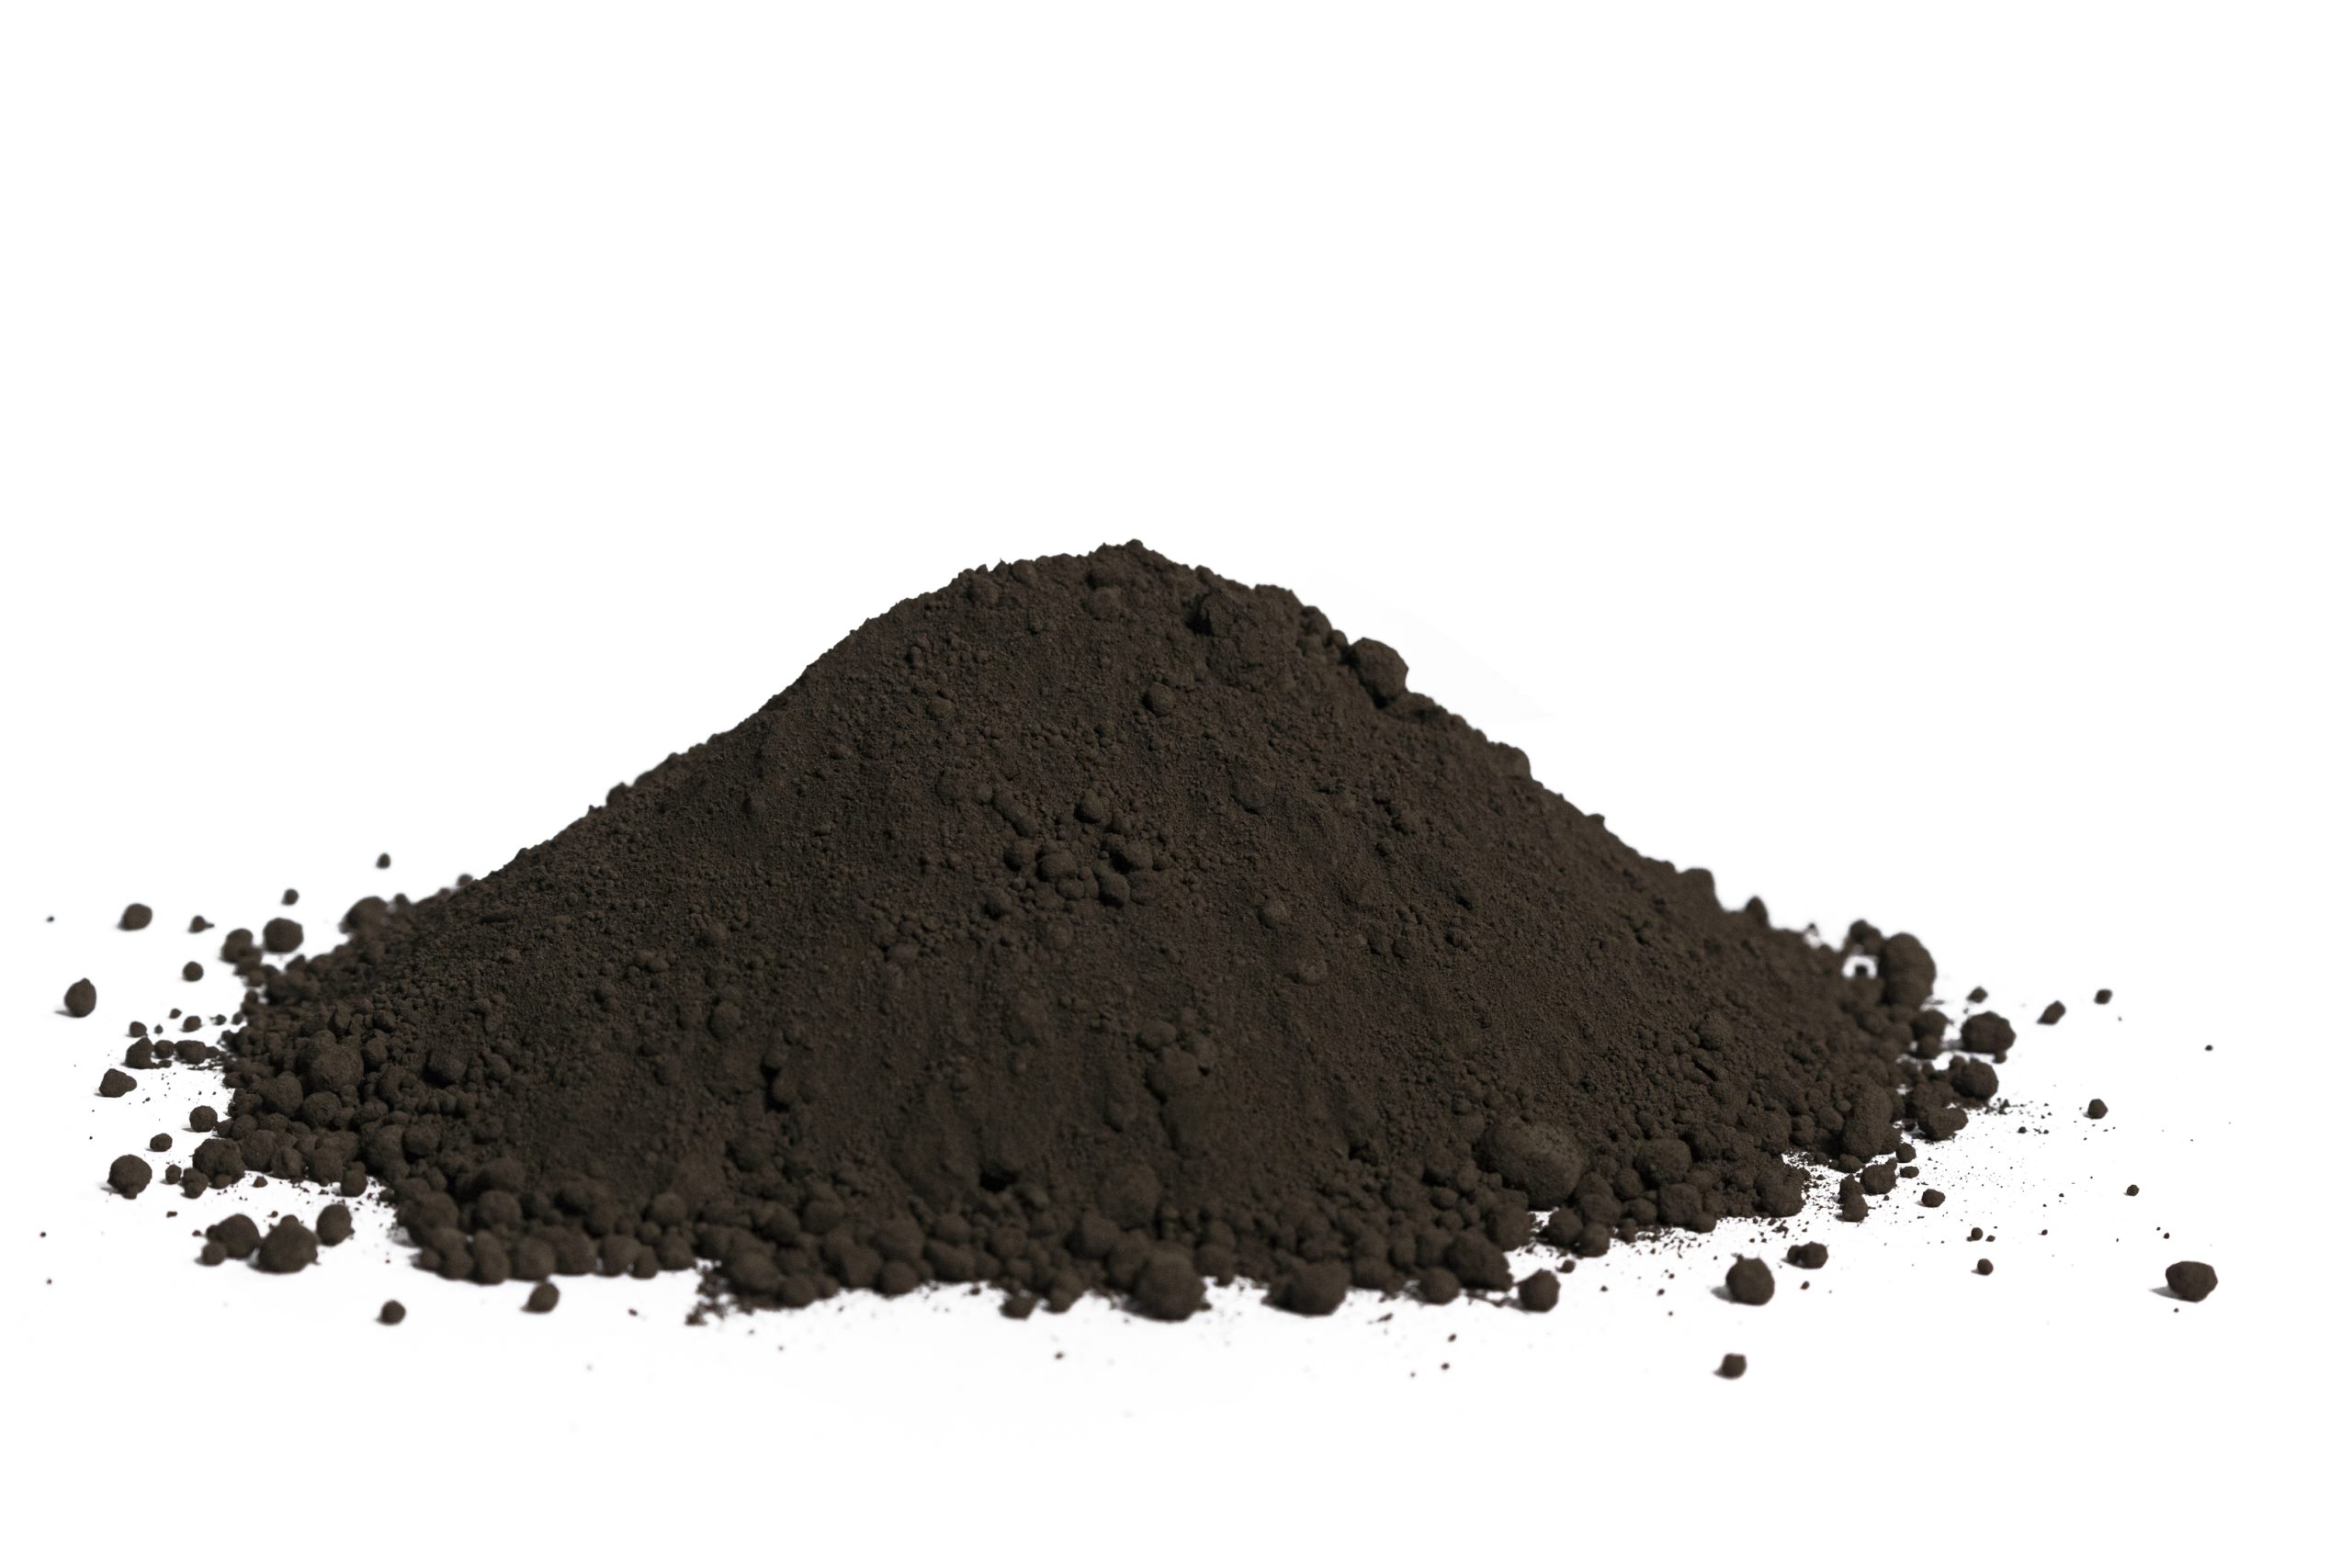 Get the Warm Grey Iron Oxide Pigment for your Construction Project - Australia